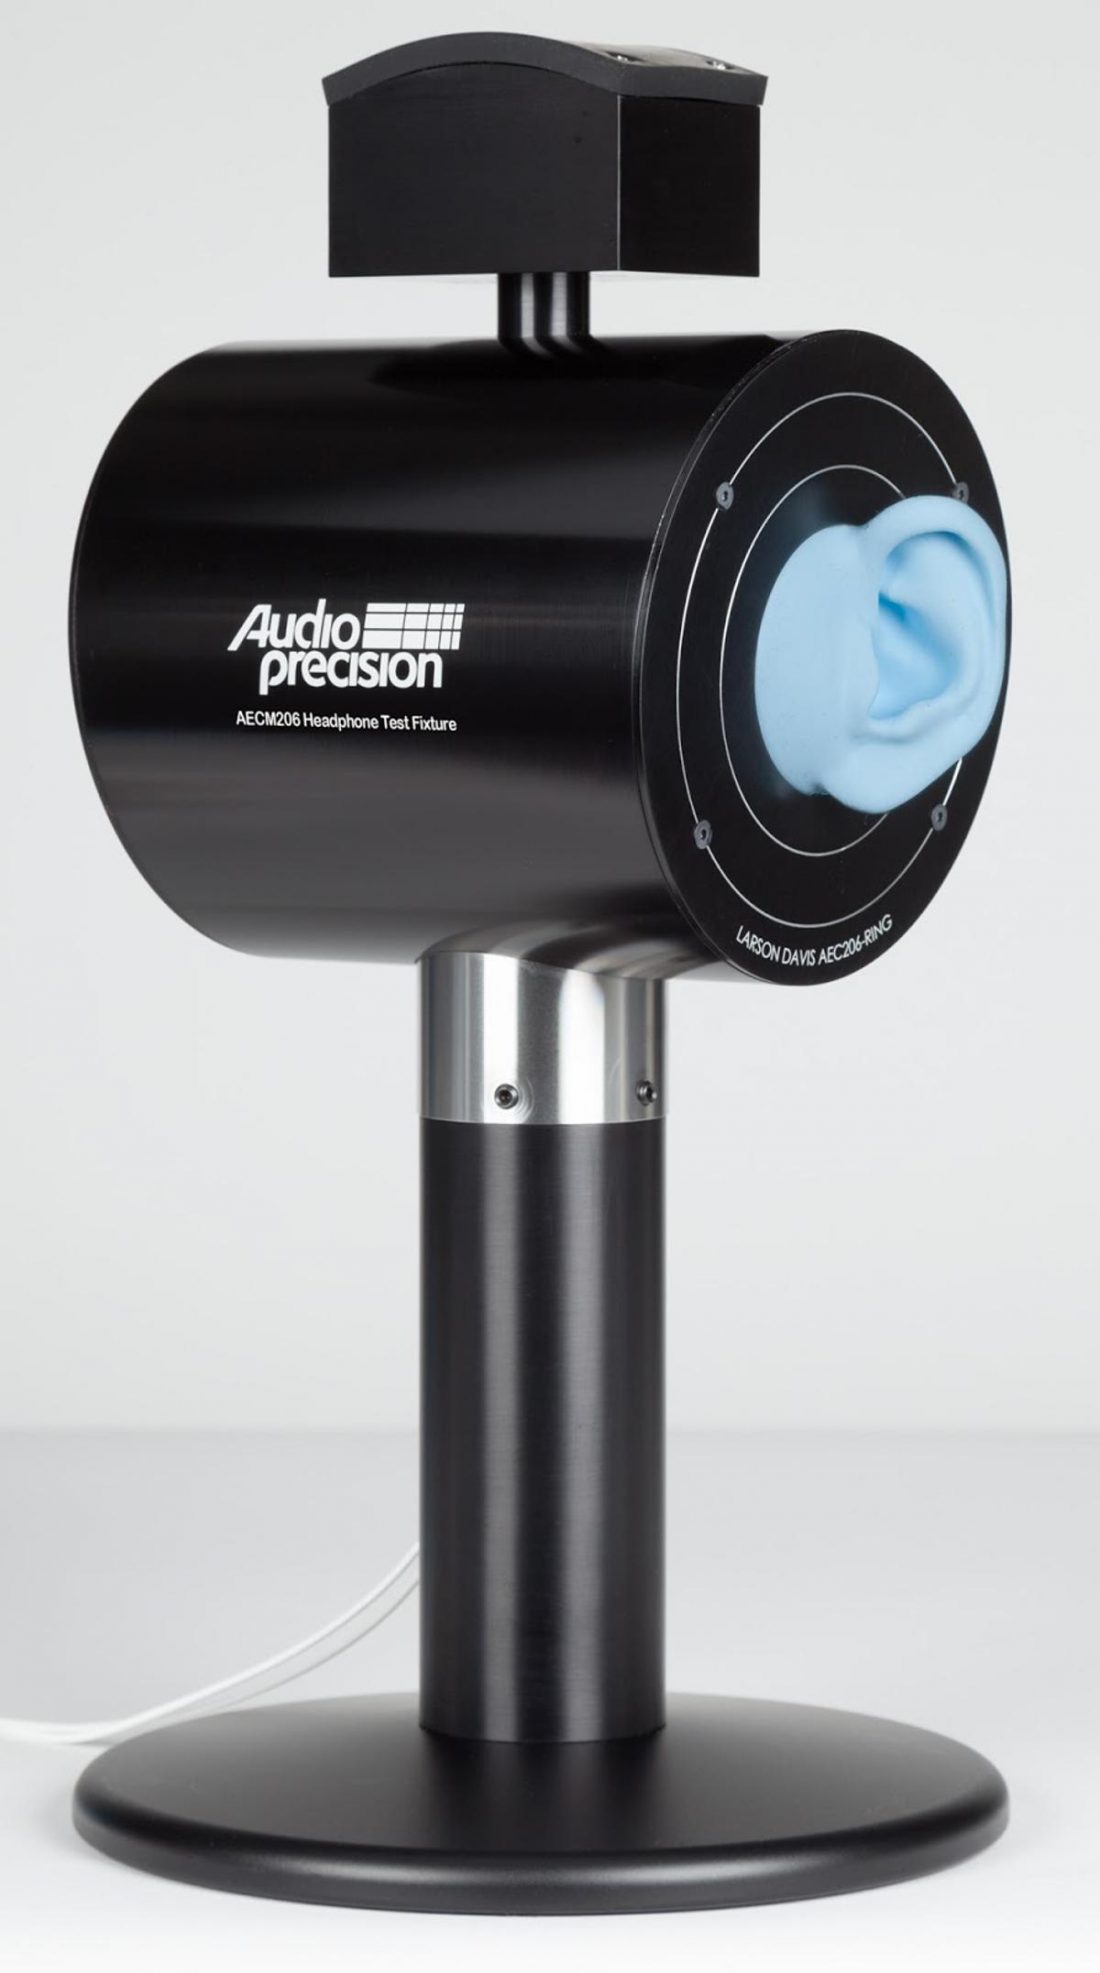 The Audio Precision AECM206 test rig is another measurement option that looks quite a bit like the EARS, albeit a much more expensive one at ±$11,000. (From ac.com)